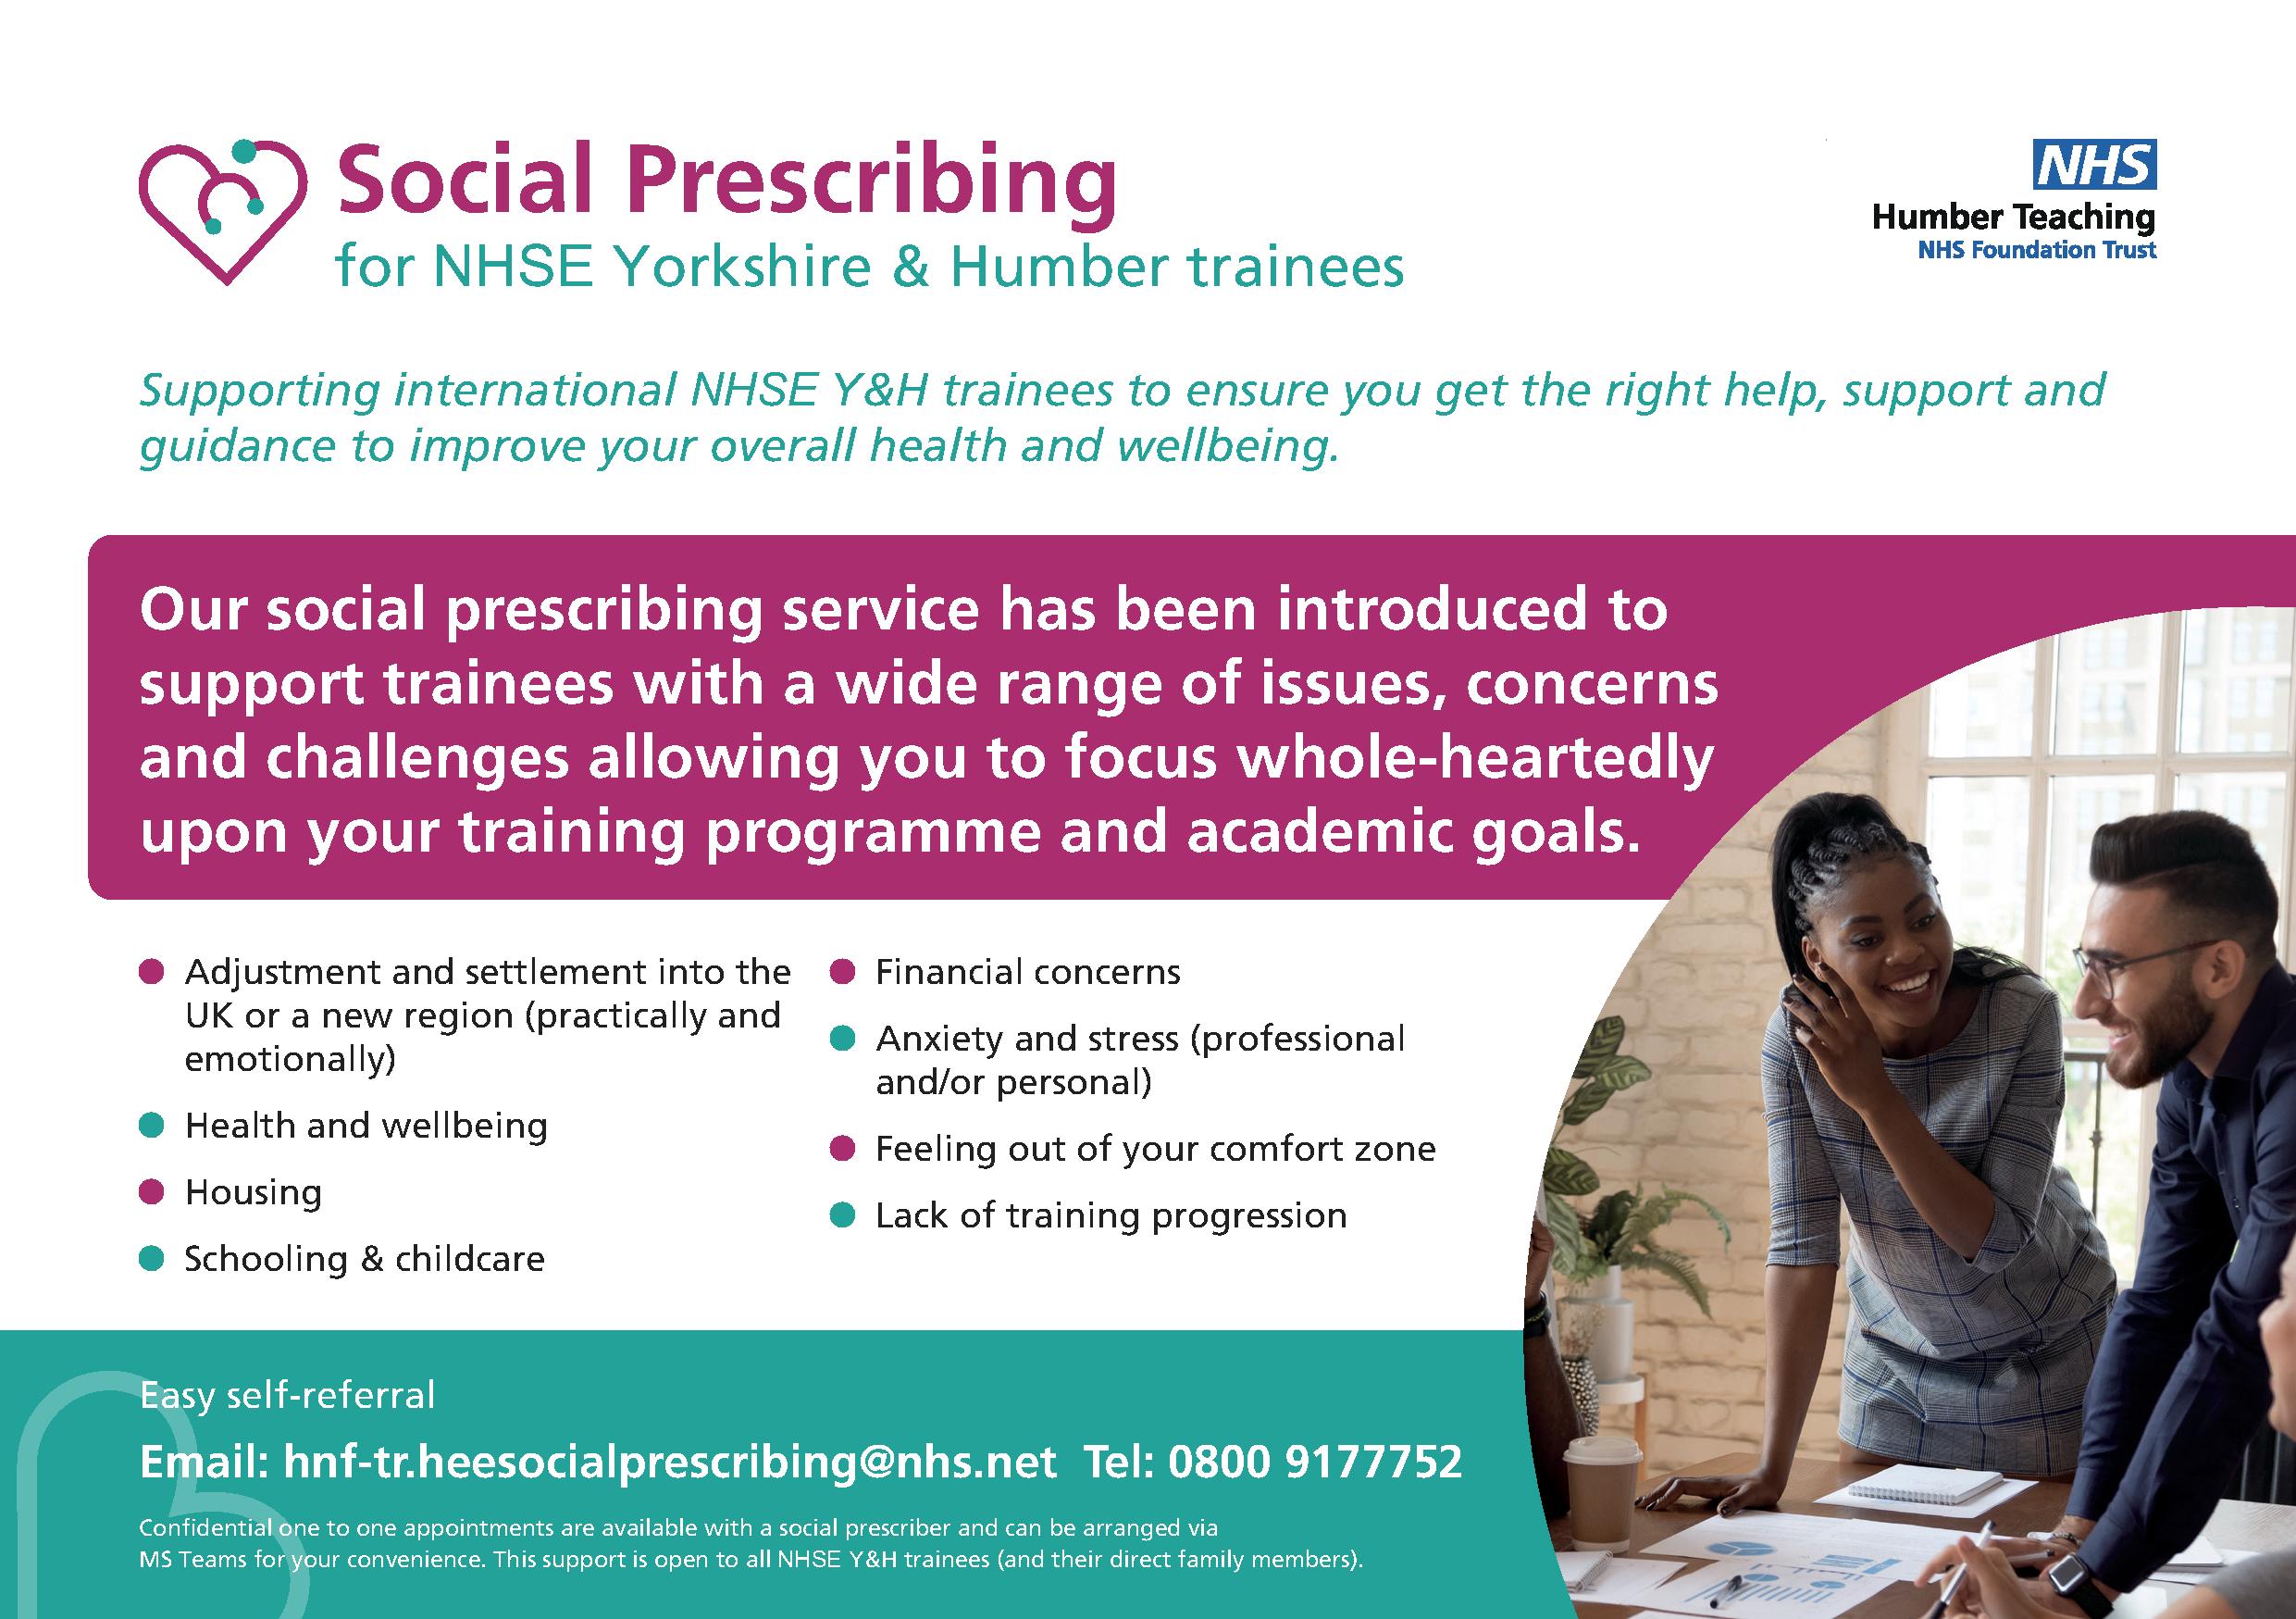 Flyer advertising the NHSE Yorkshire and Humber Social Prescribing Service for International Medical Graduates